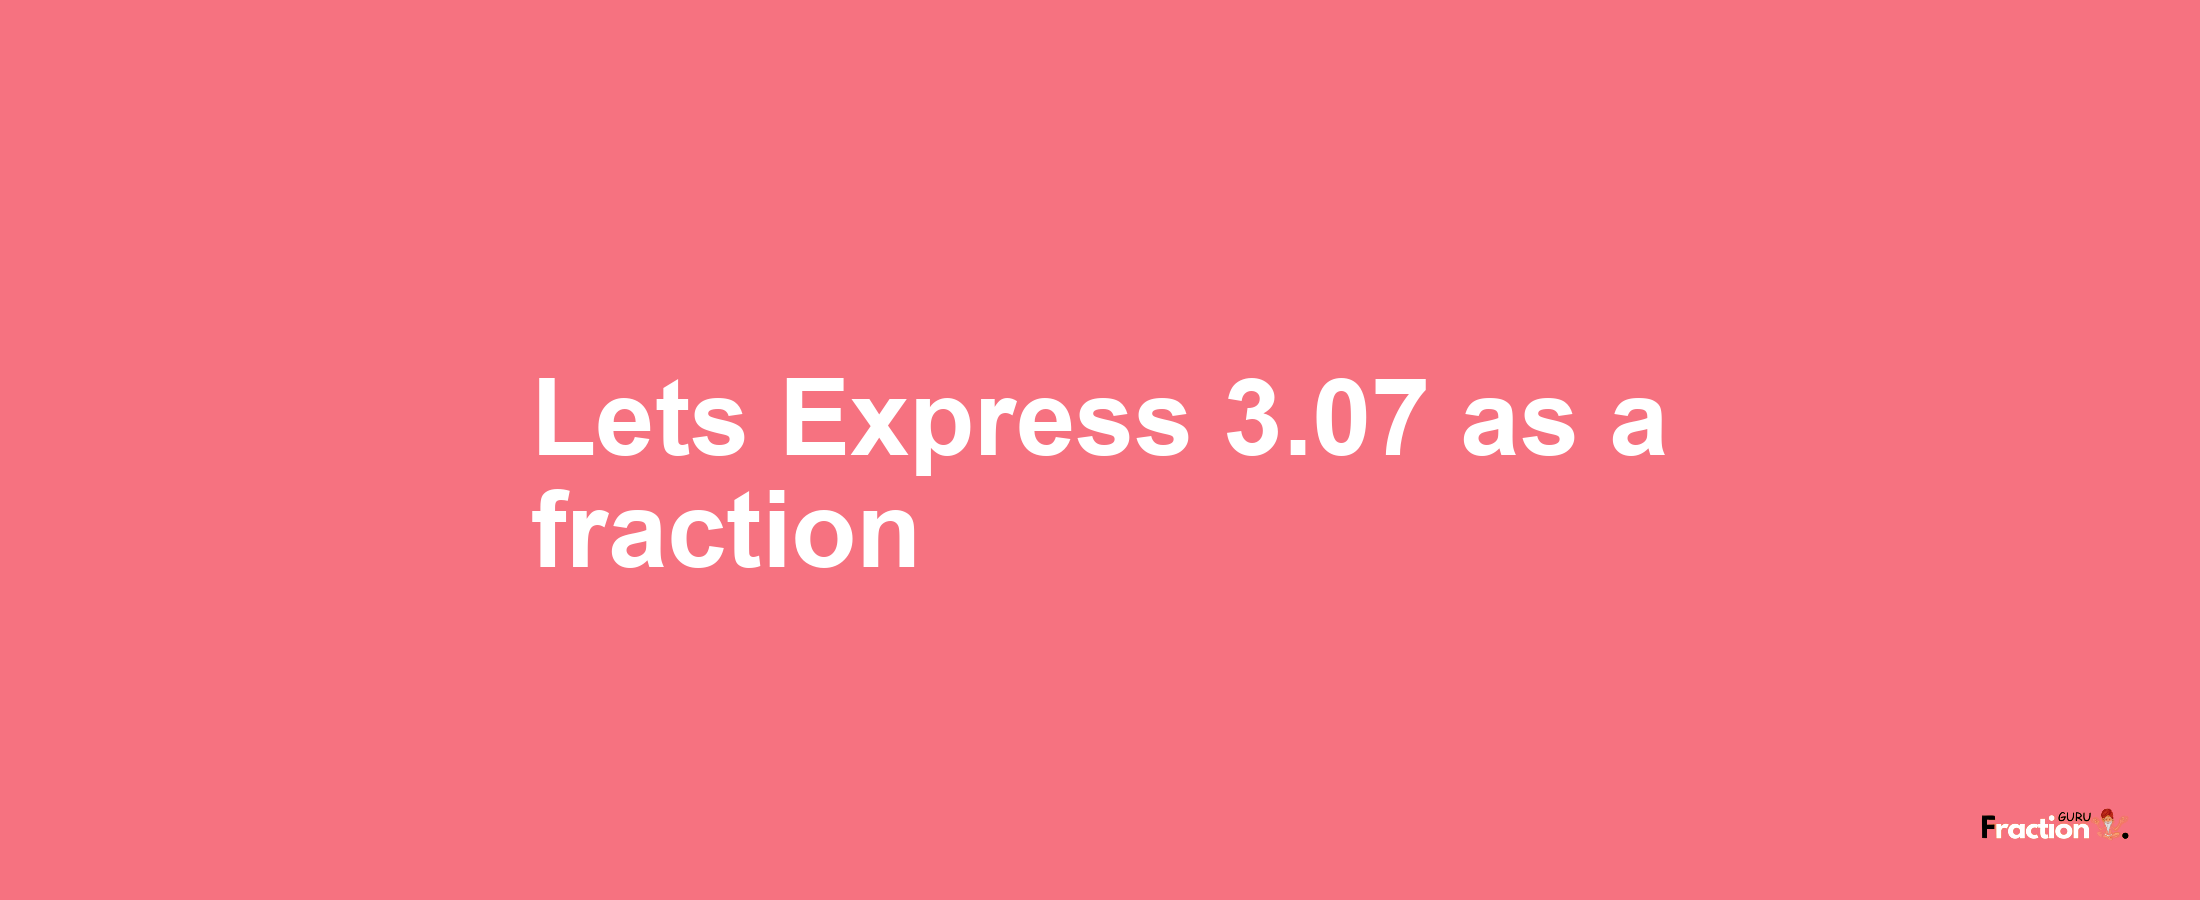 Lets Express 3.07 as afraction